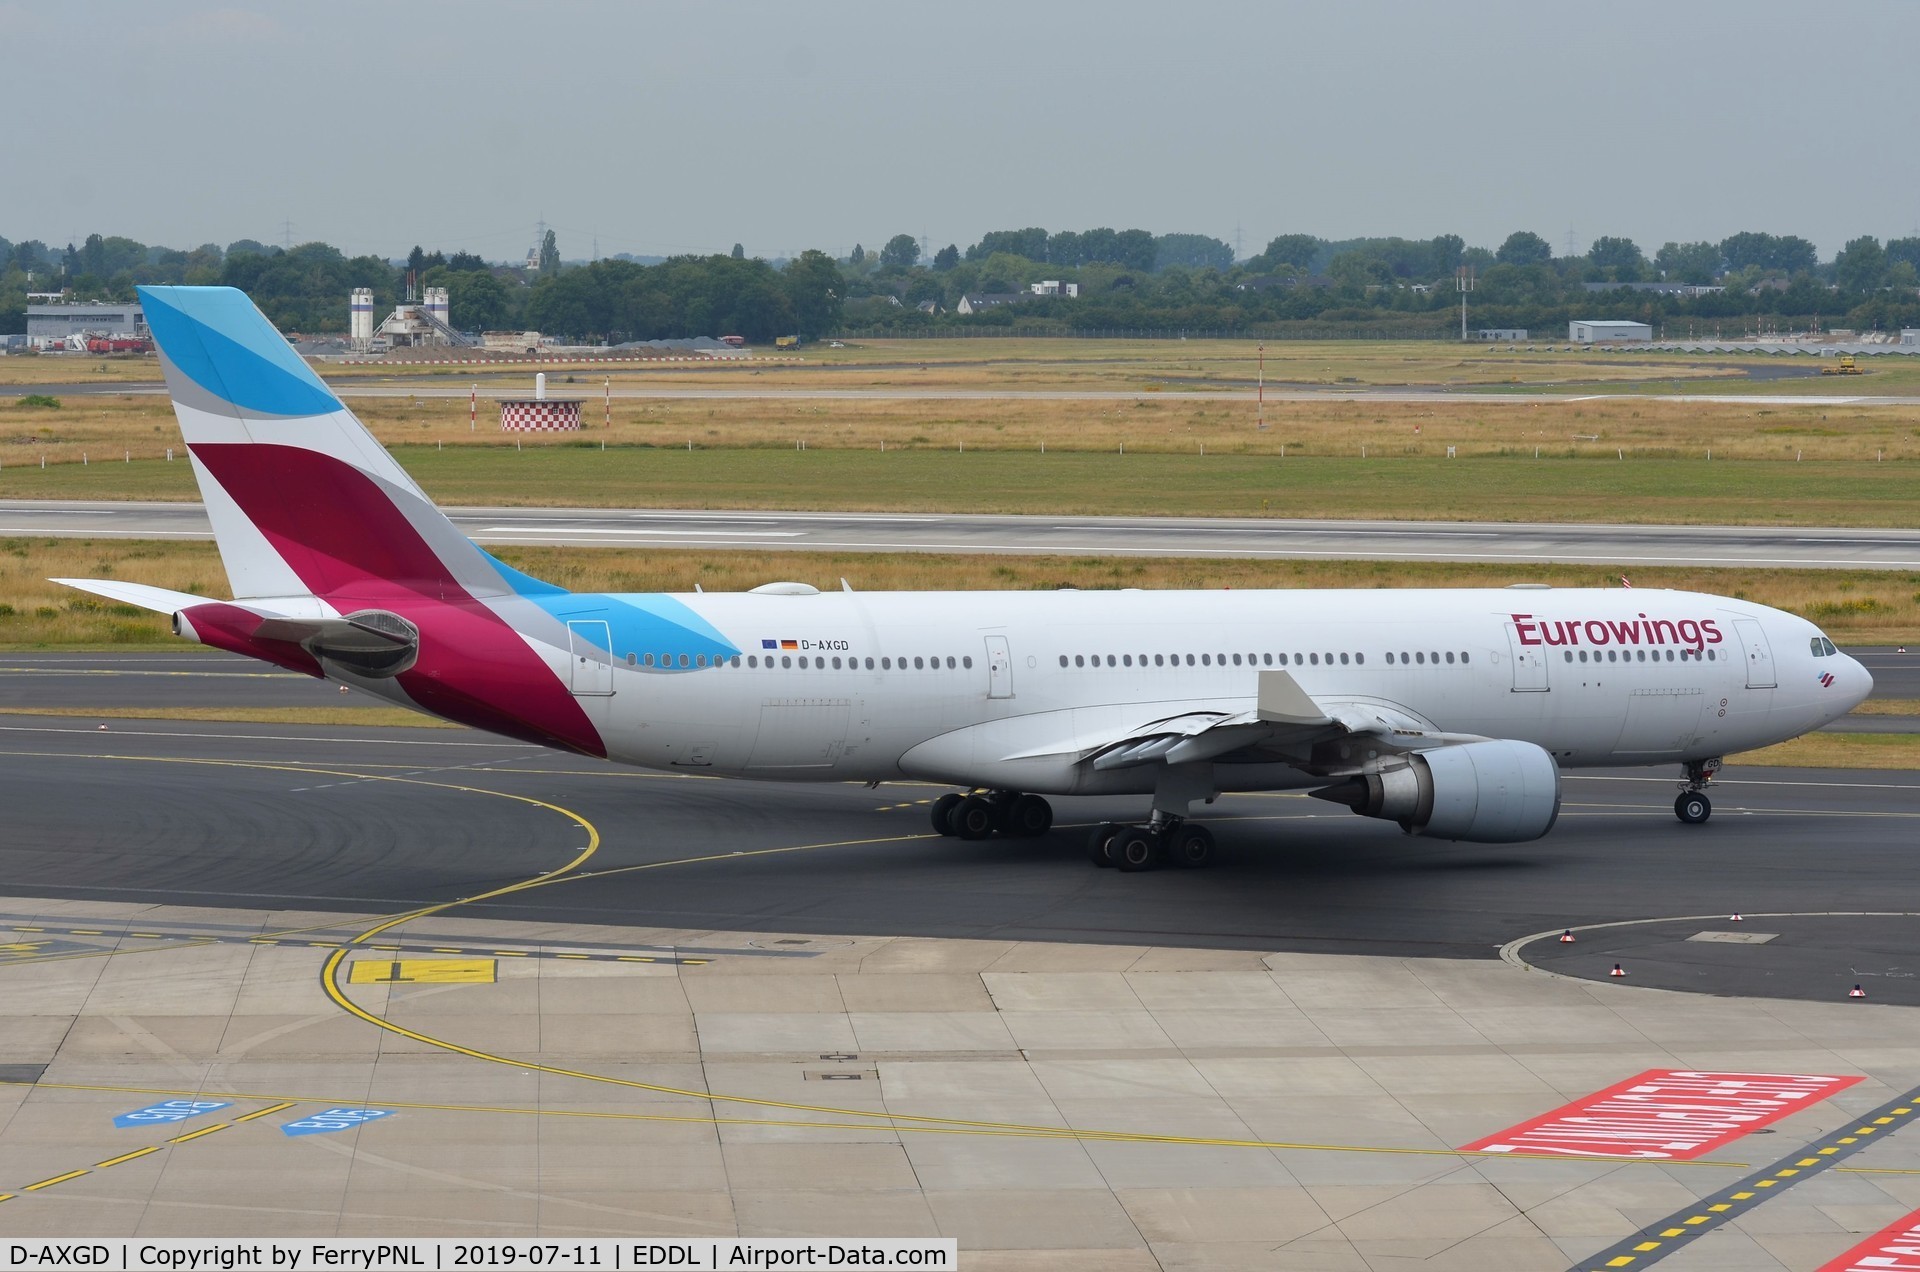 D-AXGD, 2003 Airbus A330-203 C/N 573, Eurowings A332 taxying for departure